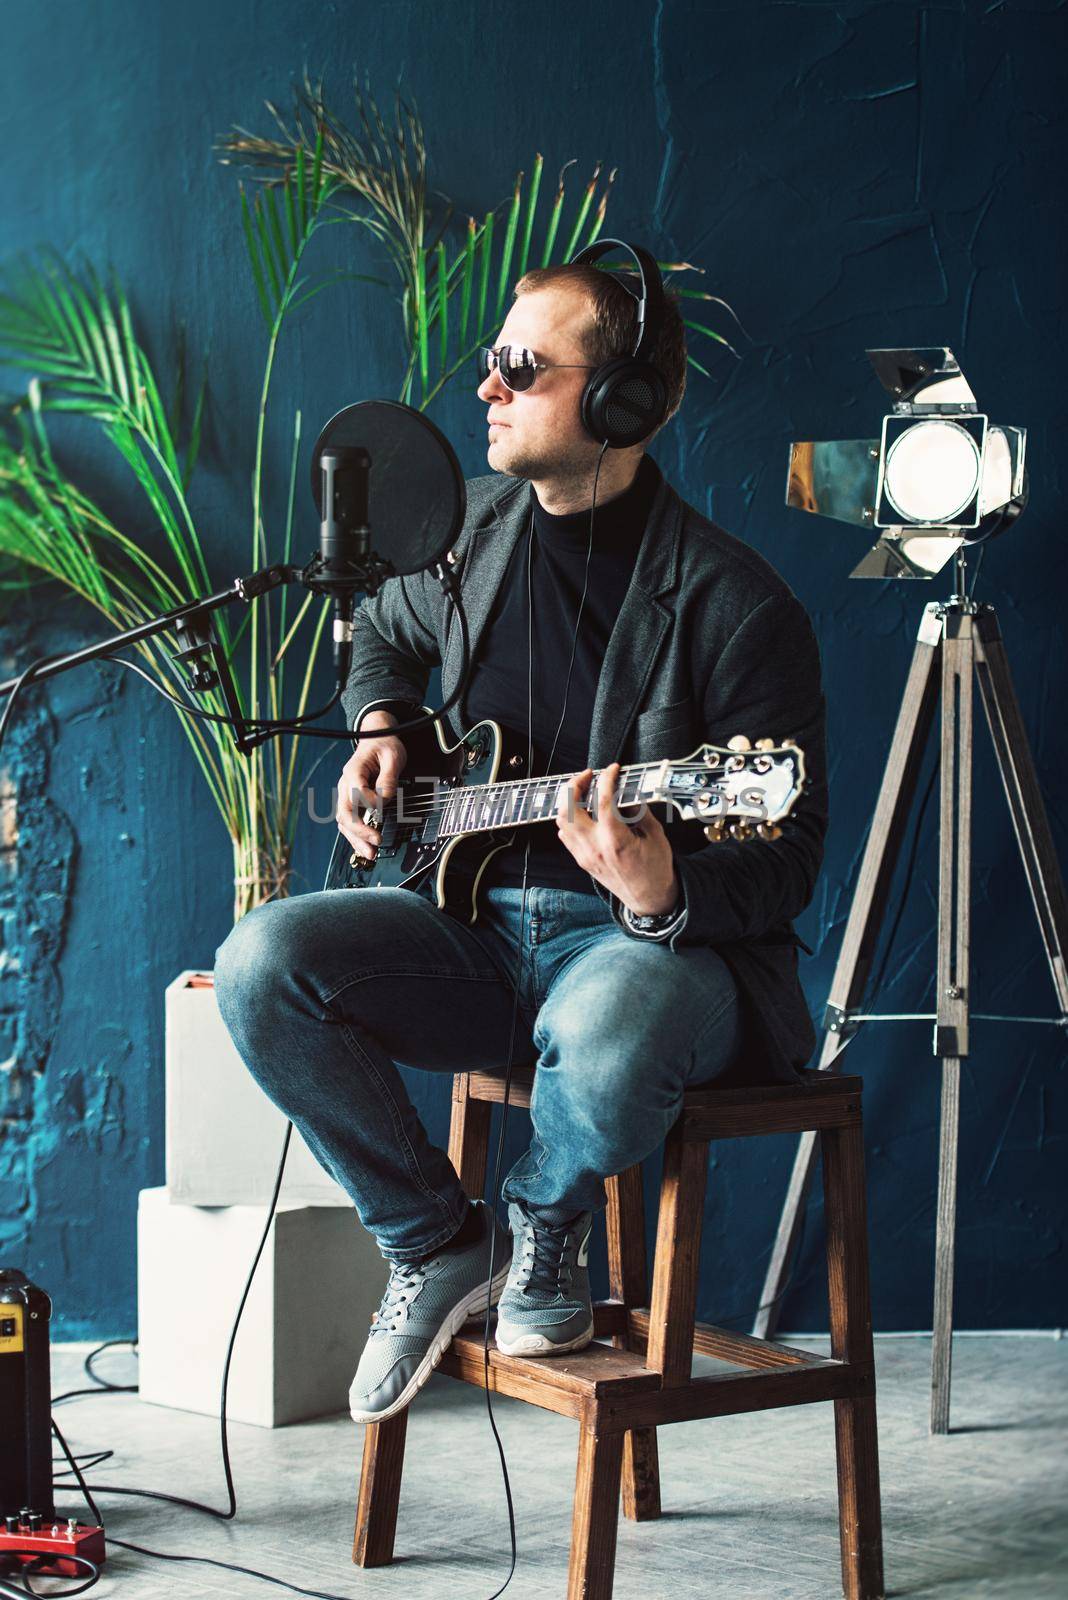 Close up of a man singer in a headphones with a guitar recording a track in a home studio. Man wearing sunglasses, jeans, black shirt and a jacket. side view